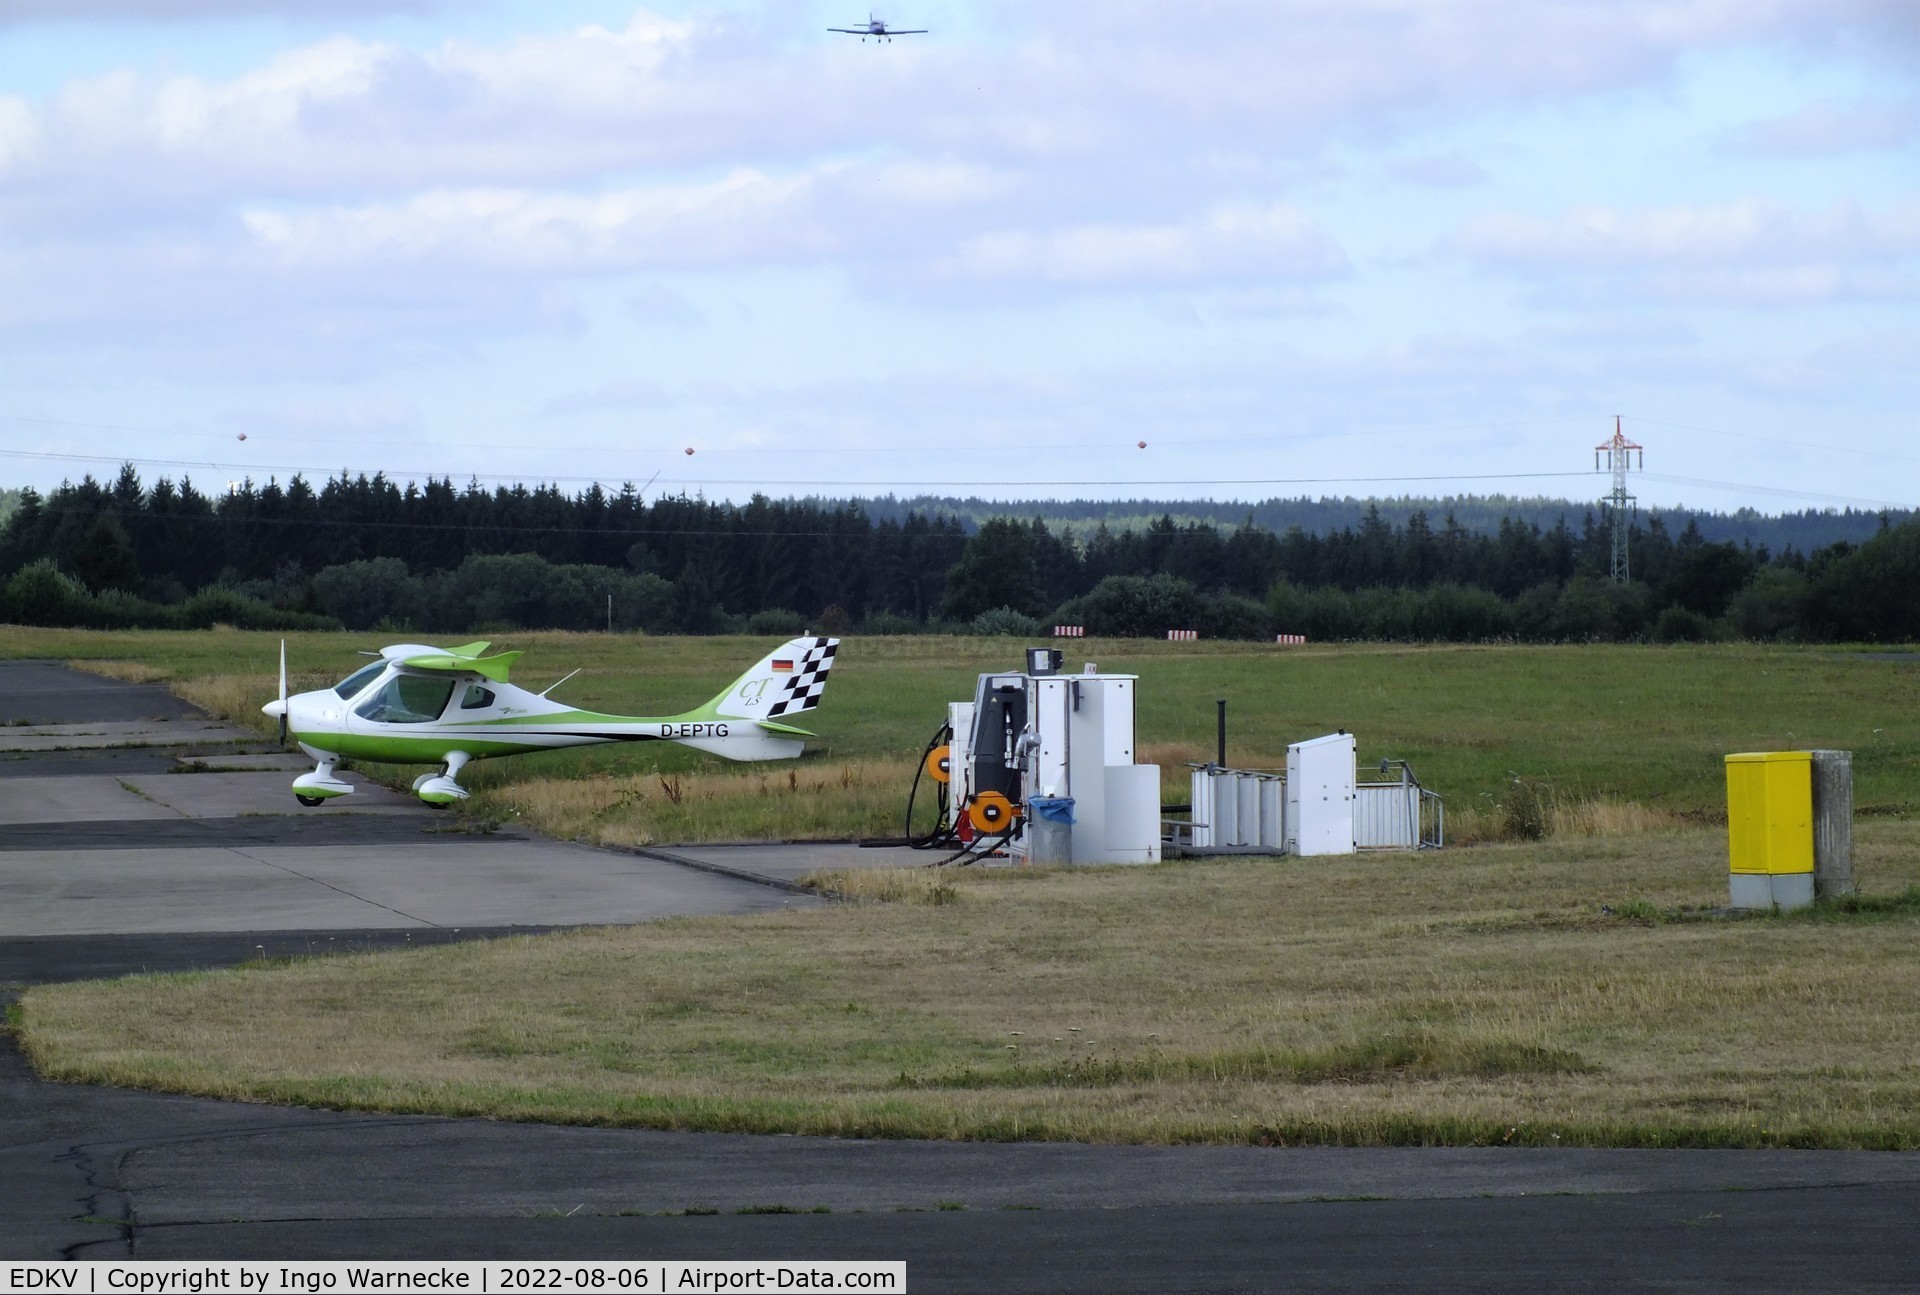 Dahlemer Binz Airport, Dahlem Germany (EDKV) - the airfield fuelling station at Dahlemer Binz airfield